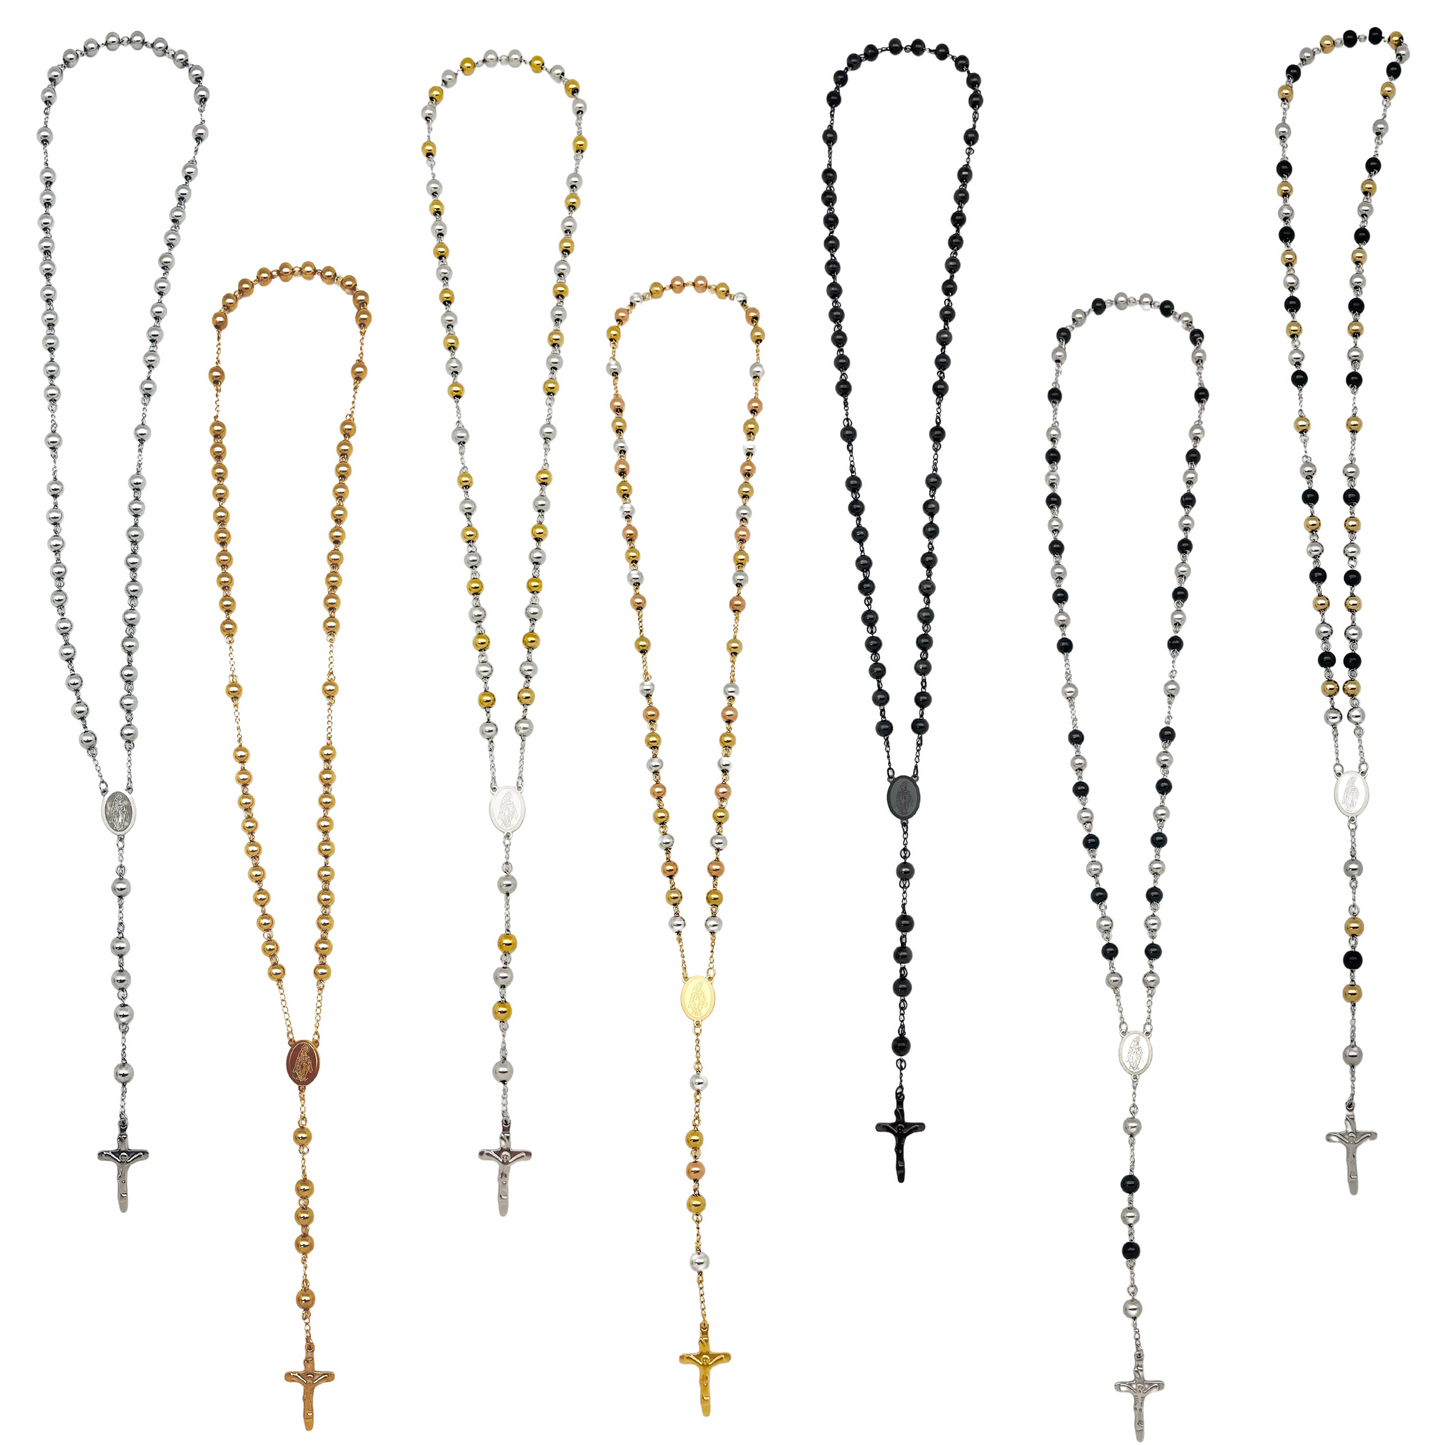 8.0mm Rosary Beads